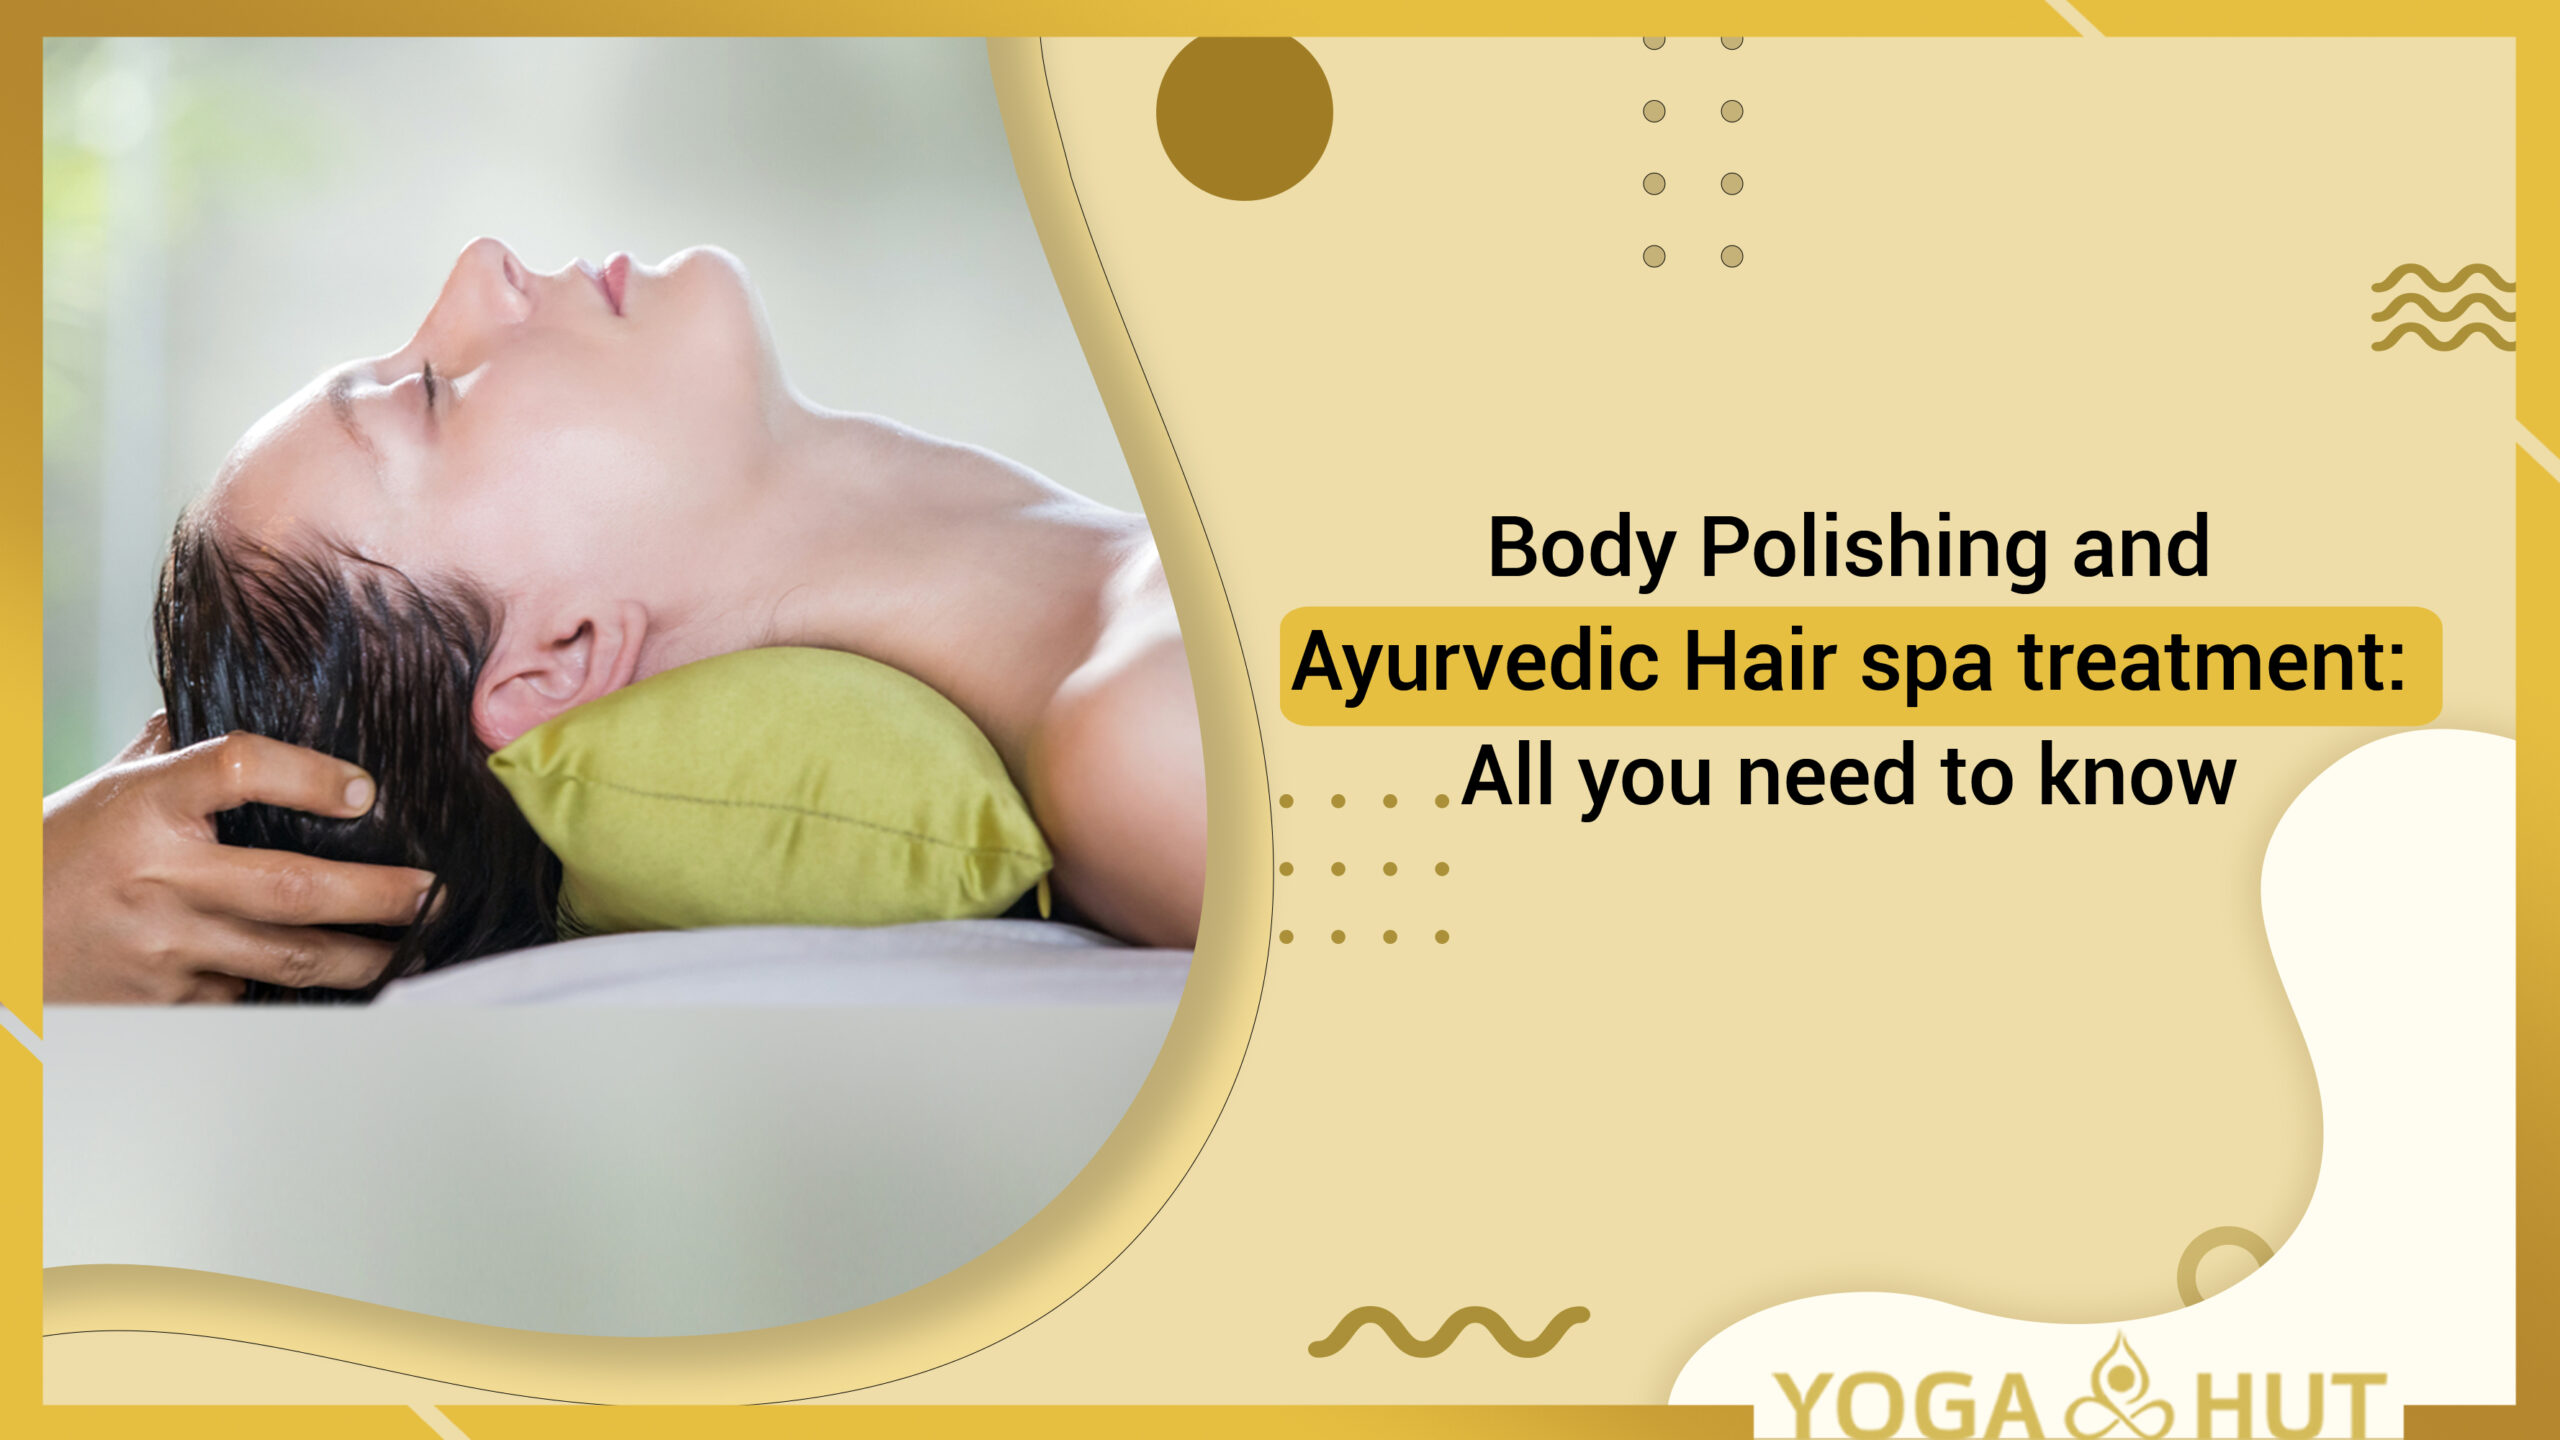 Body Polishing and Ayurvedic Hair spa treatment: All you need to know 